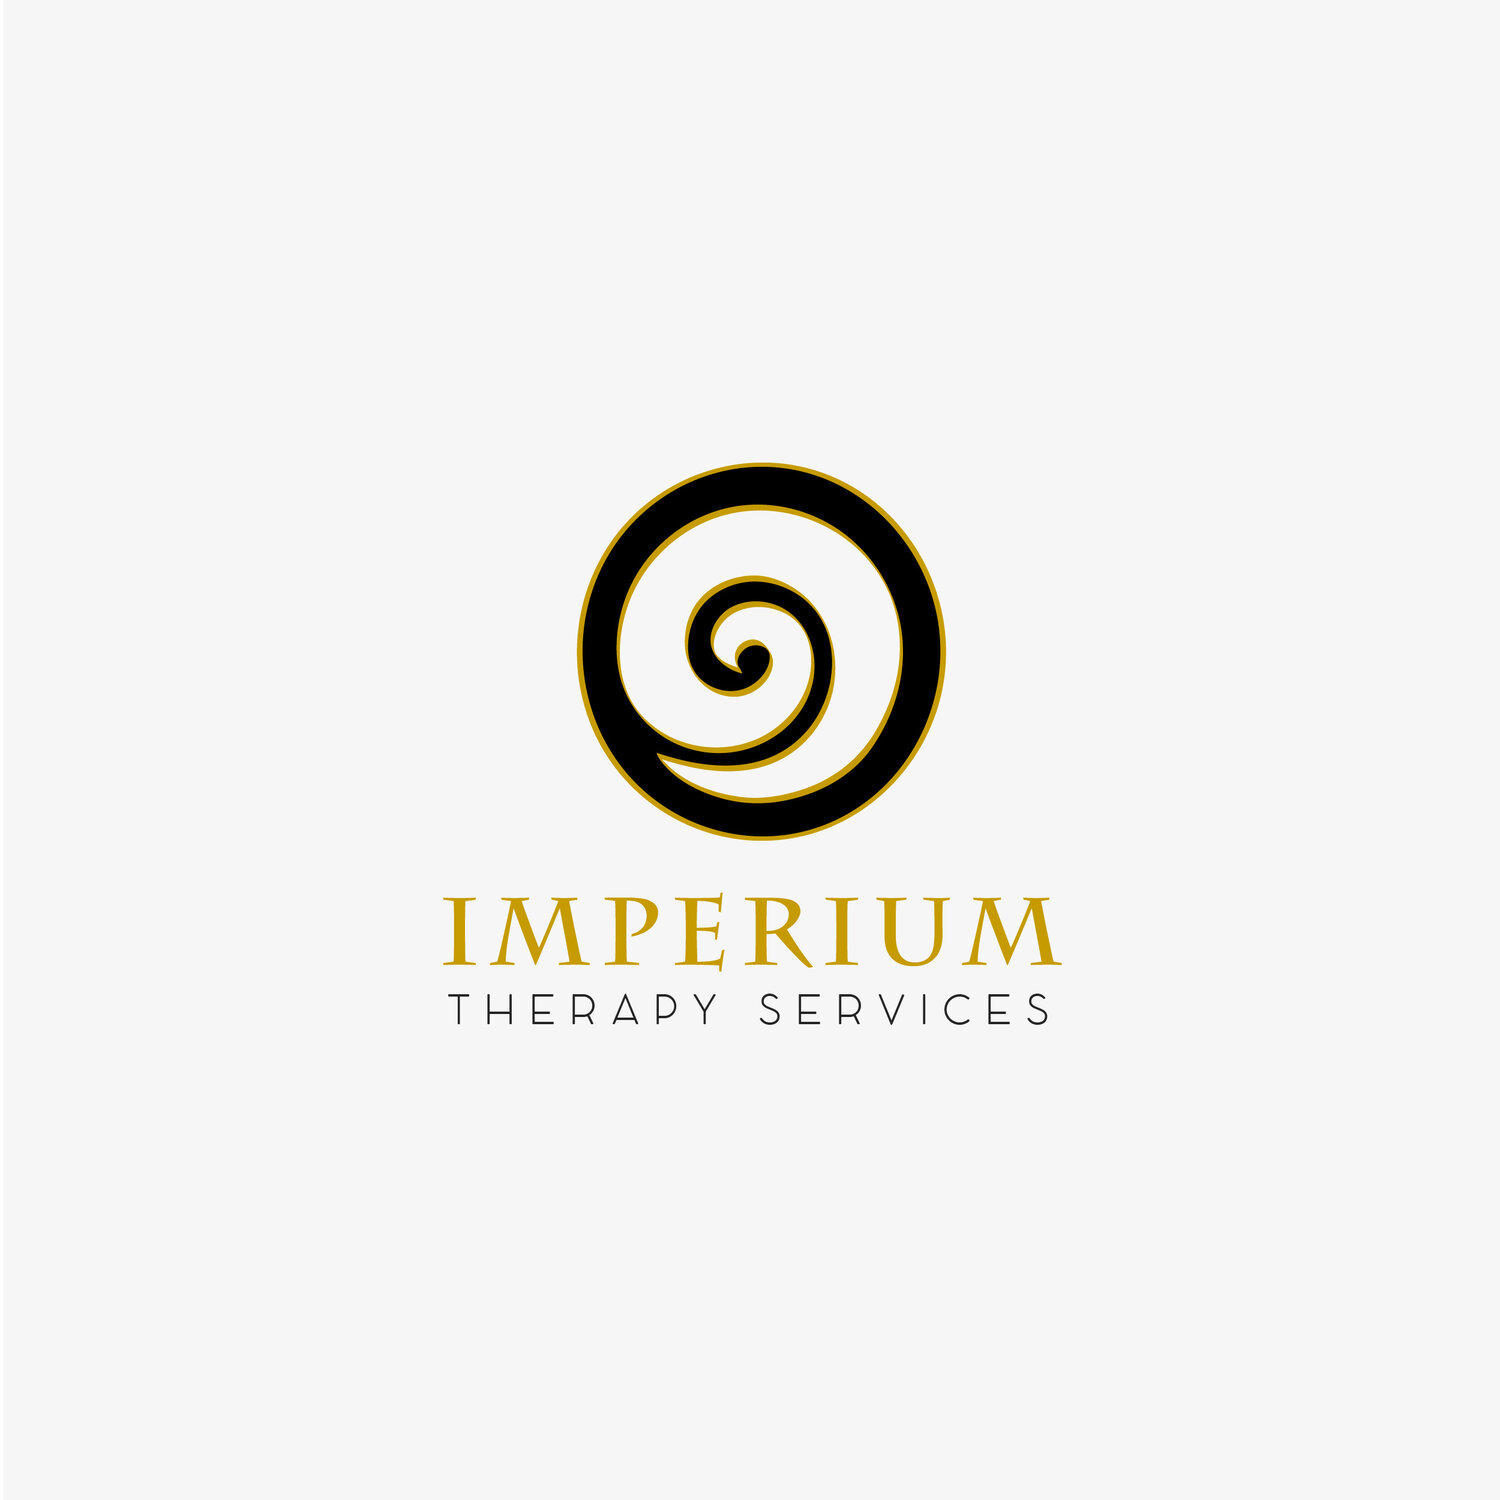 Imperium Therapy Services